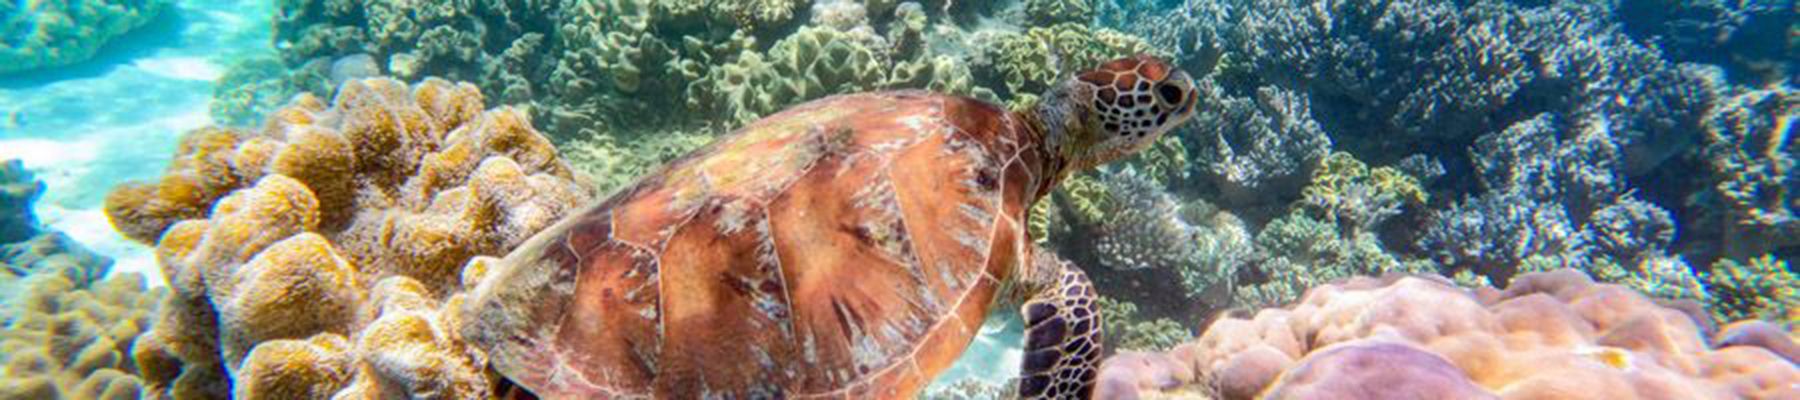 Turtle in the reef, Cairns